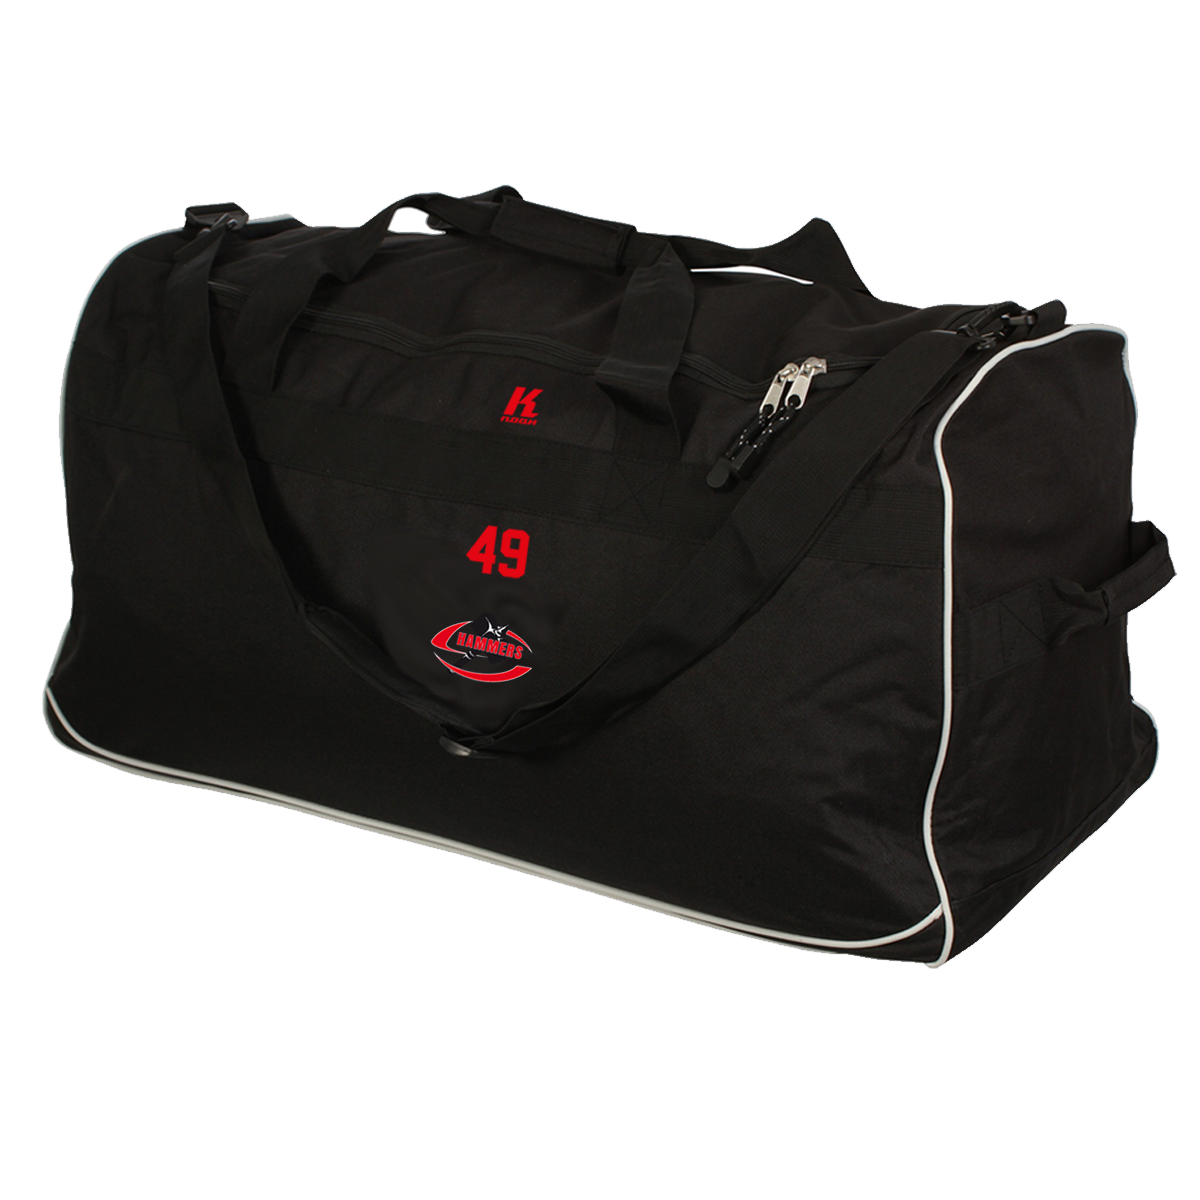 S-Hammers Jumbo Team Kitbag with Playernumber or Initials